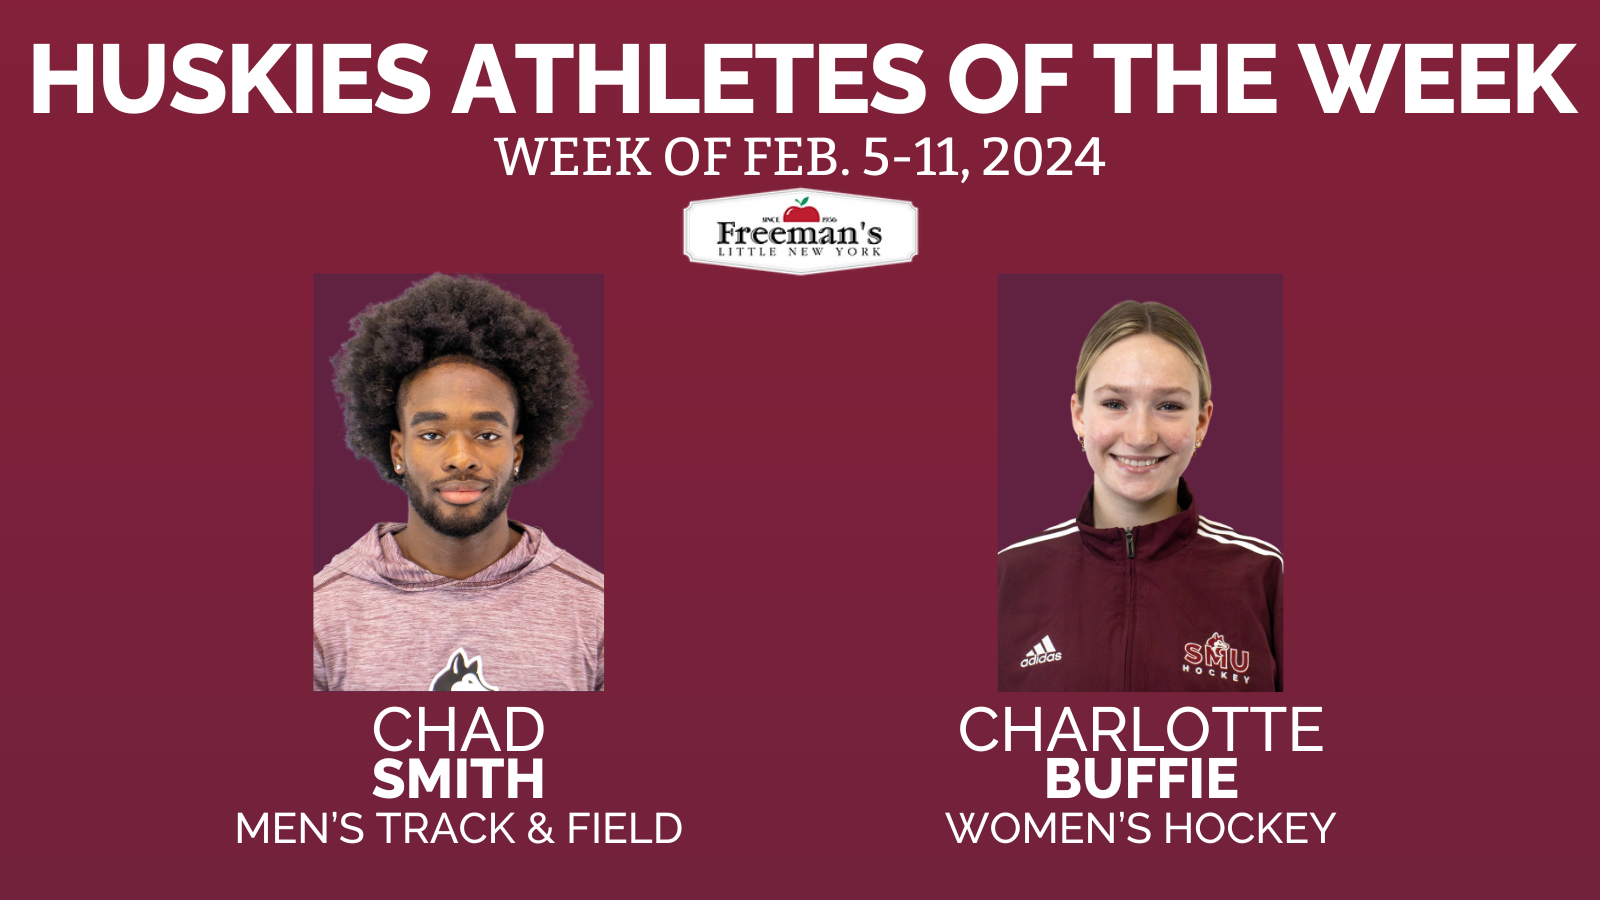 Smith, Buffie named Huskies Athletes of the Week: Feb. 5 - 11, 2024